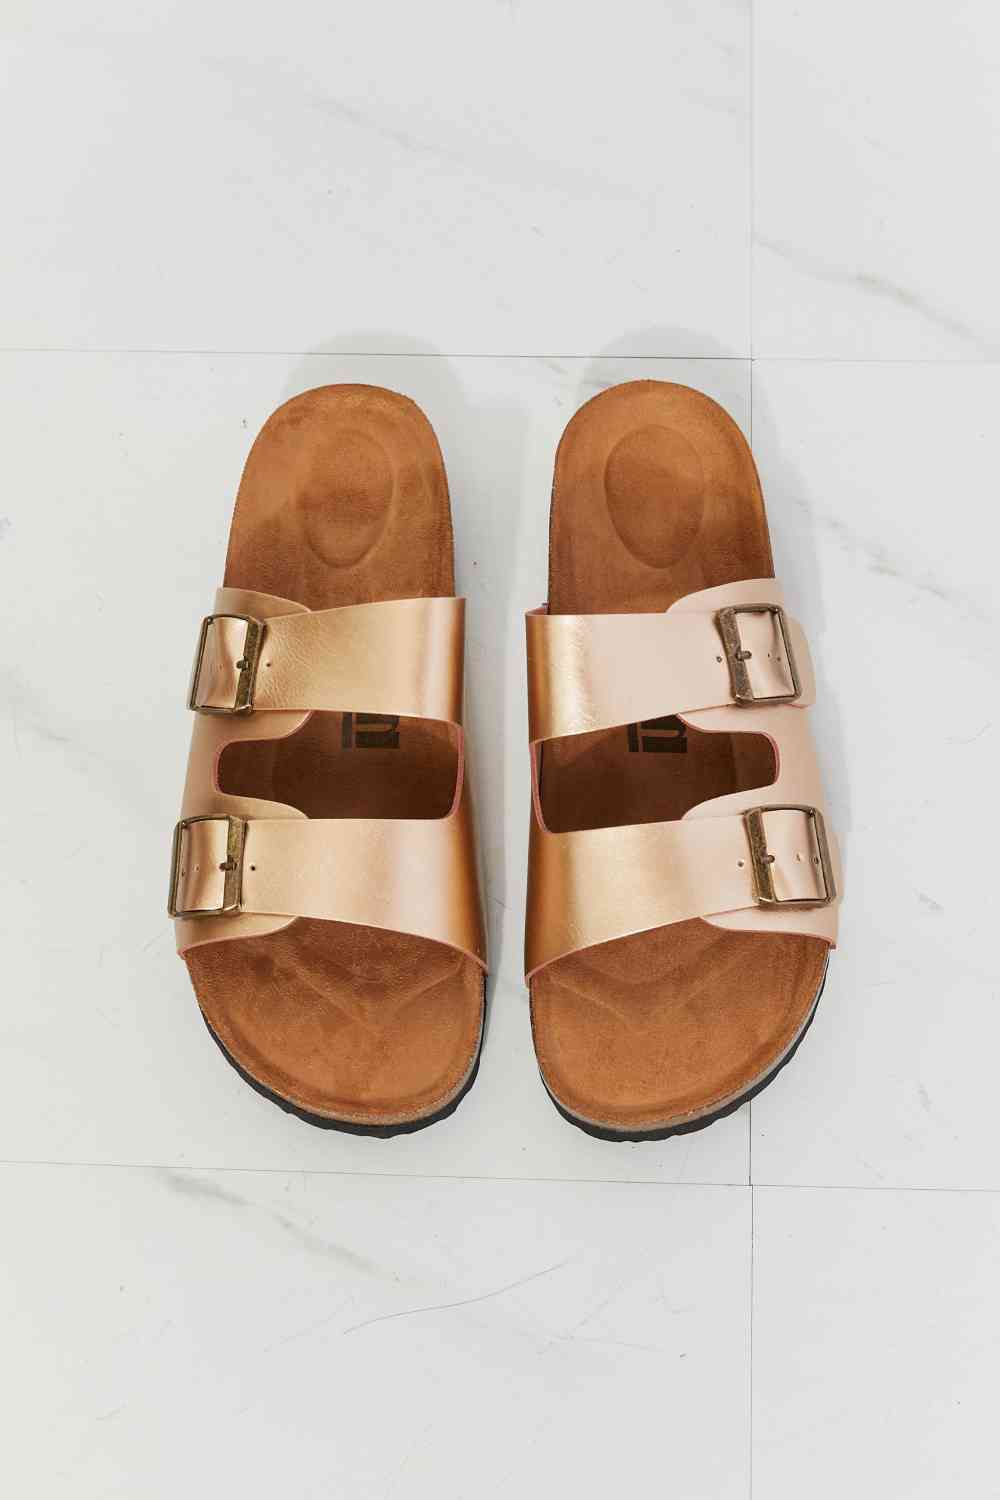 Best Life Double-Banded Slide Sandal in Gold - Accessories - Shoes - 4 - 2024